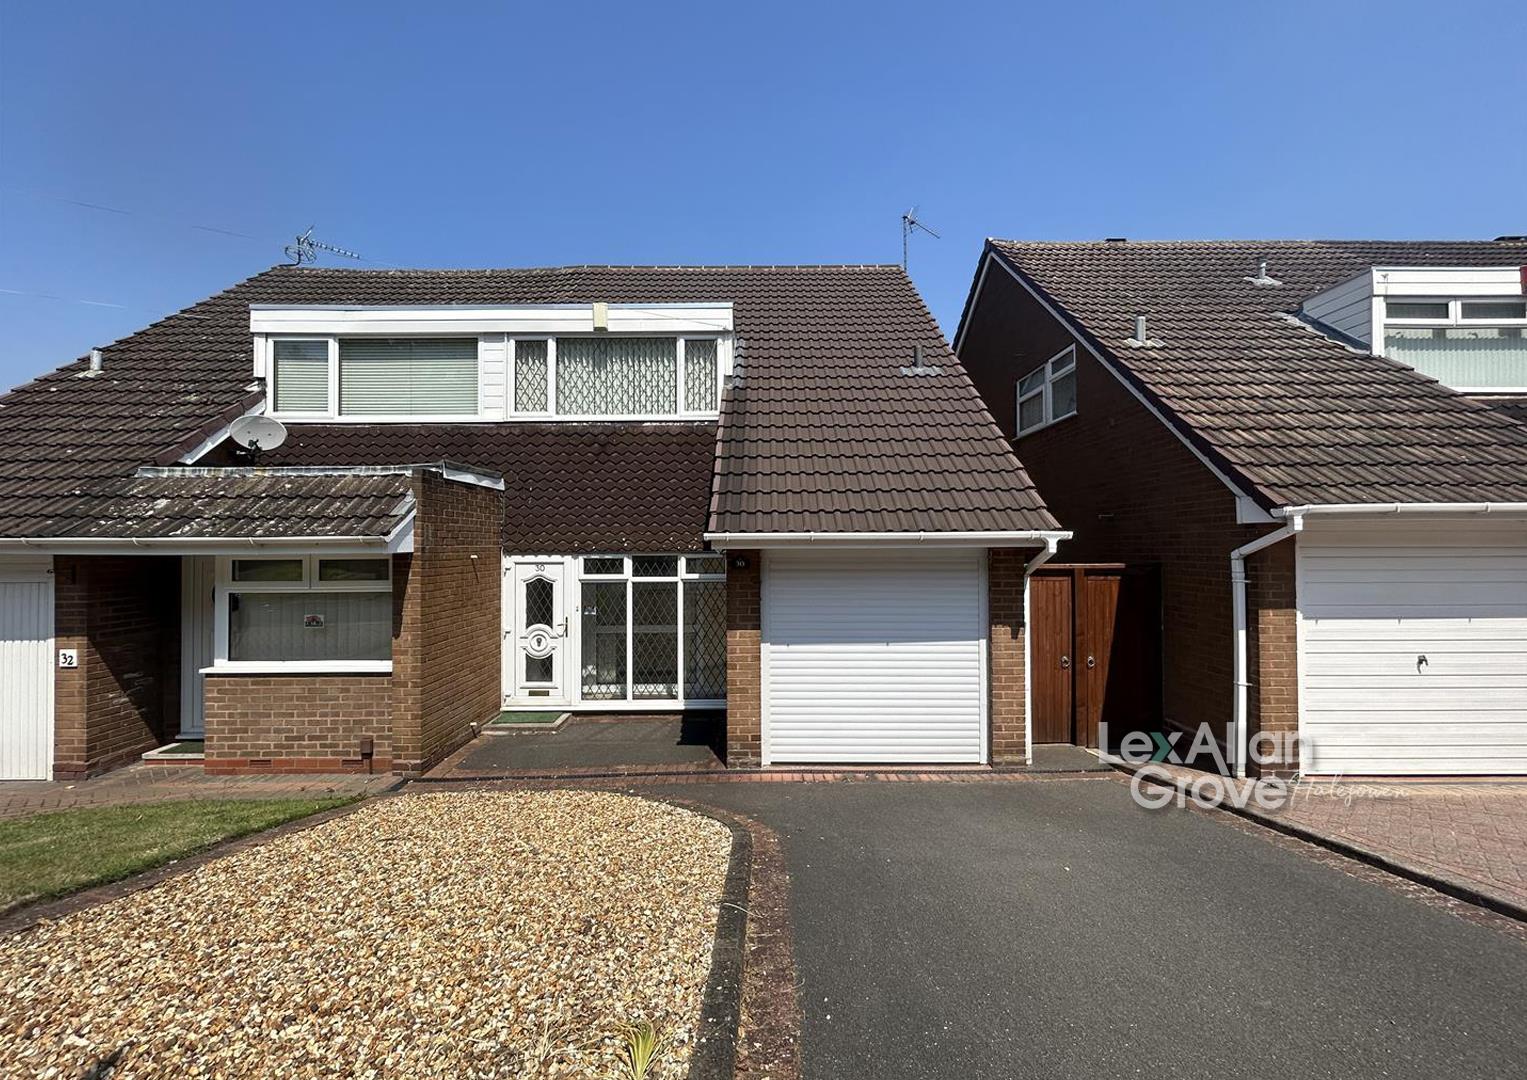 3 bed semi-detached house for sale in Whitestone Road, Halesowen  - Property Image 1